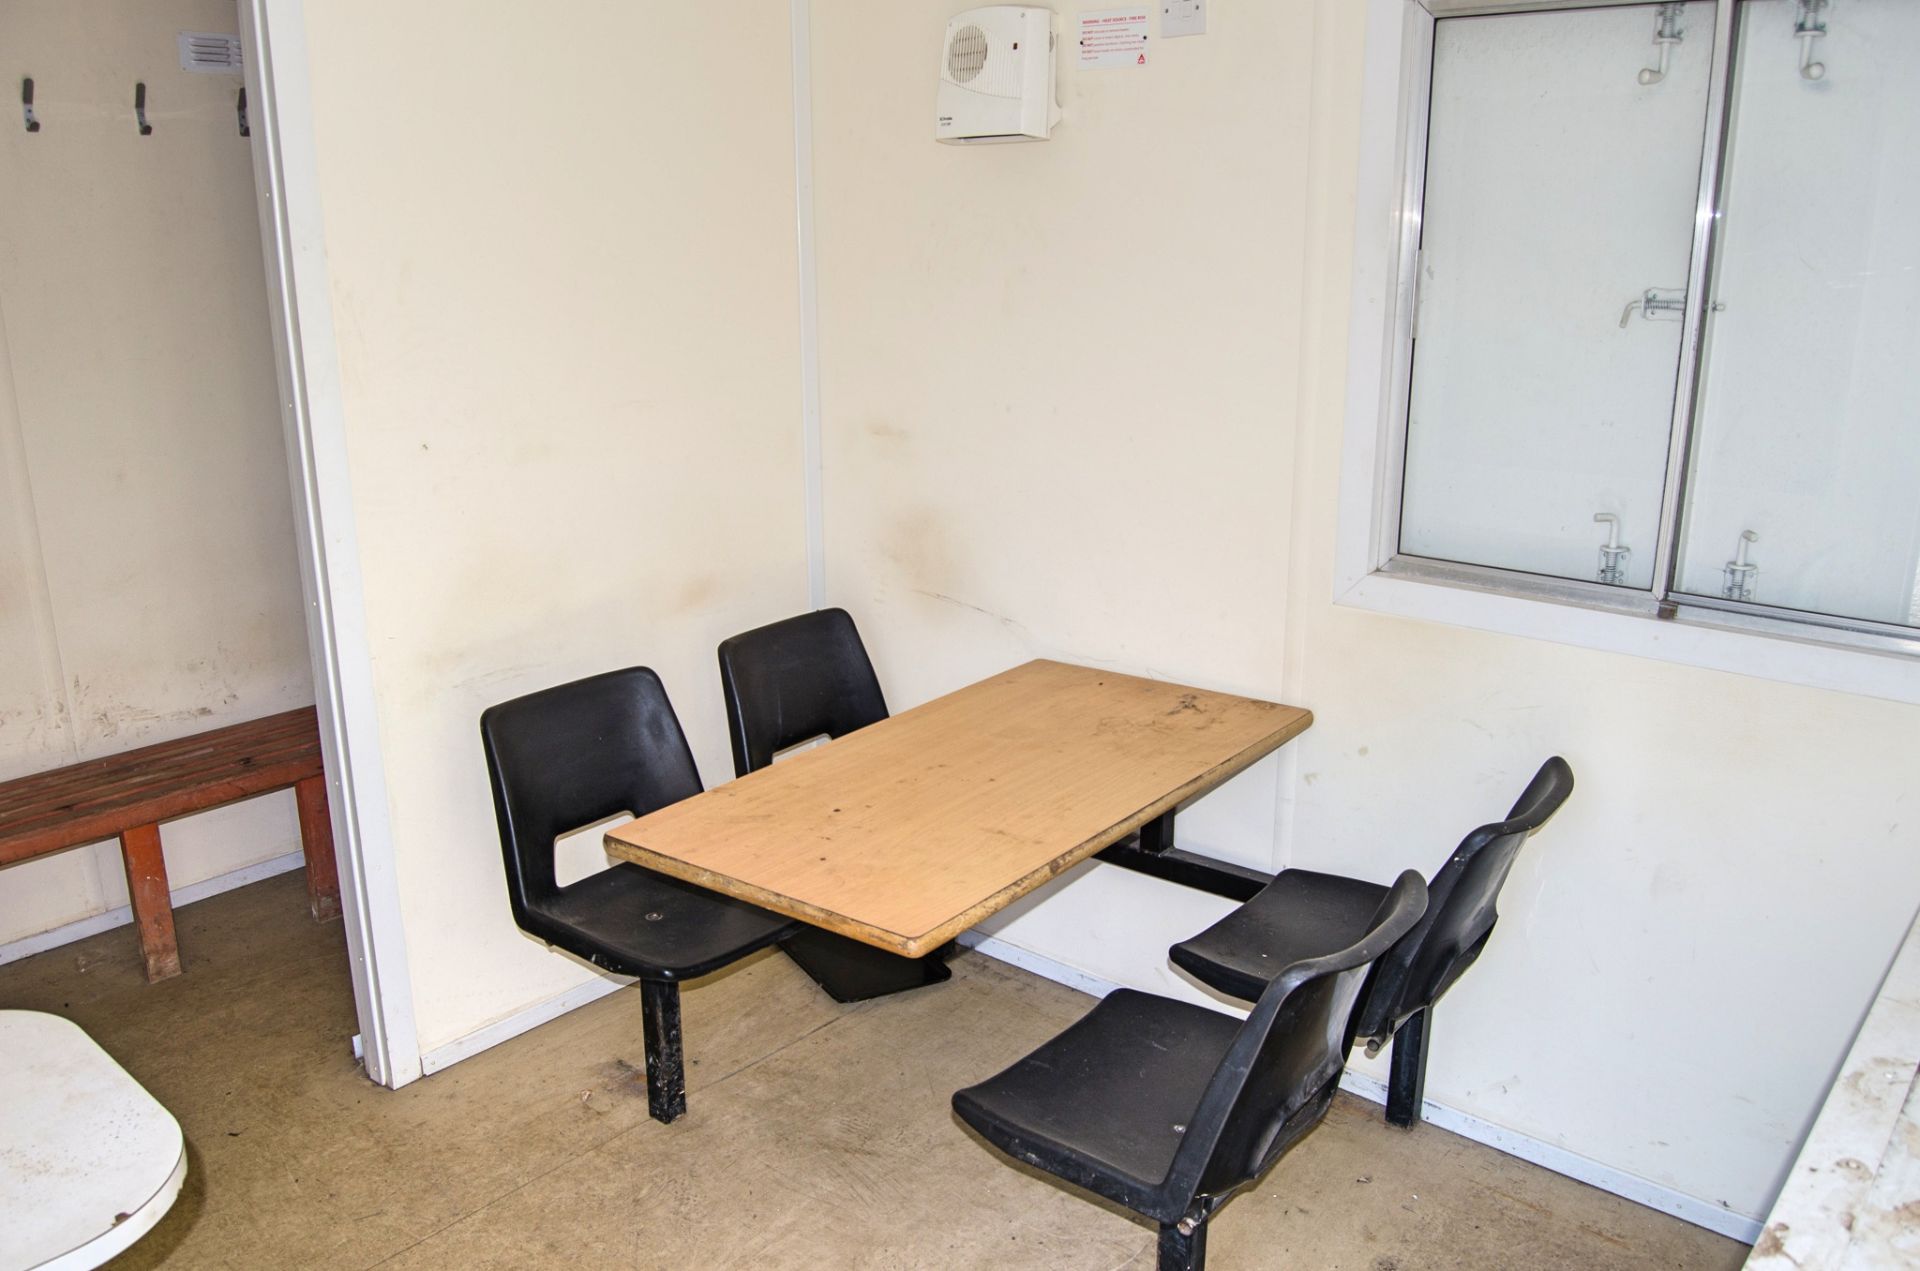 24ft x 9 ft steel anti-vandal welfare site unit Comprising of: canteen area, changing area, - Image 5 of 12